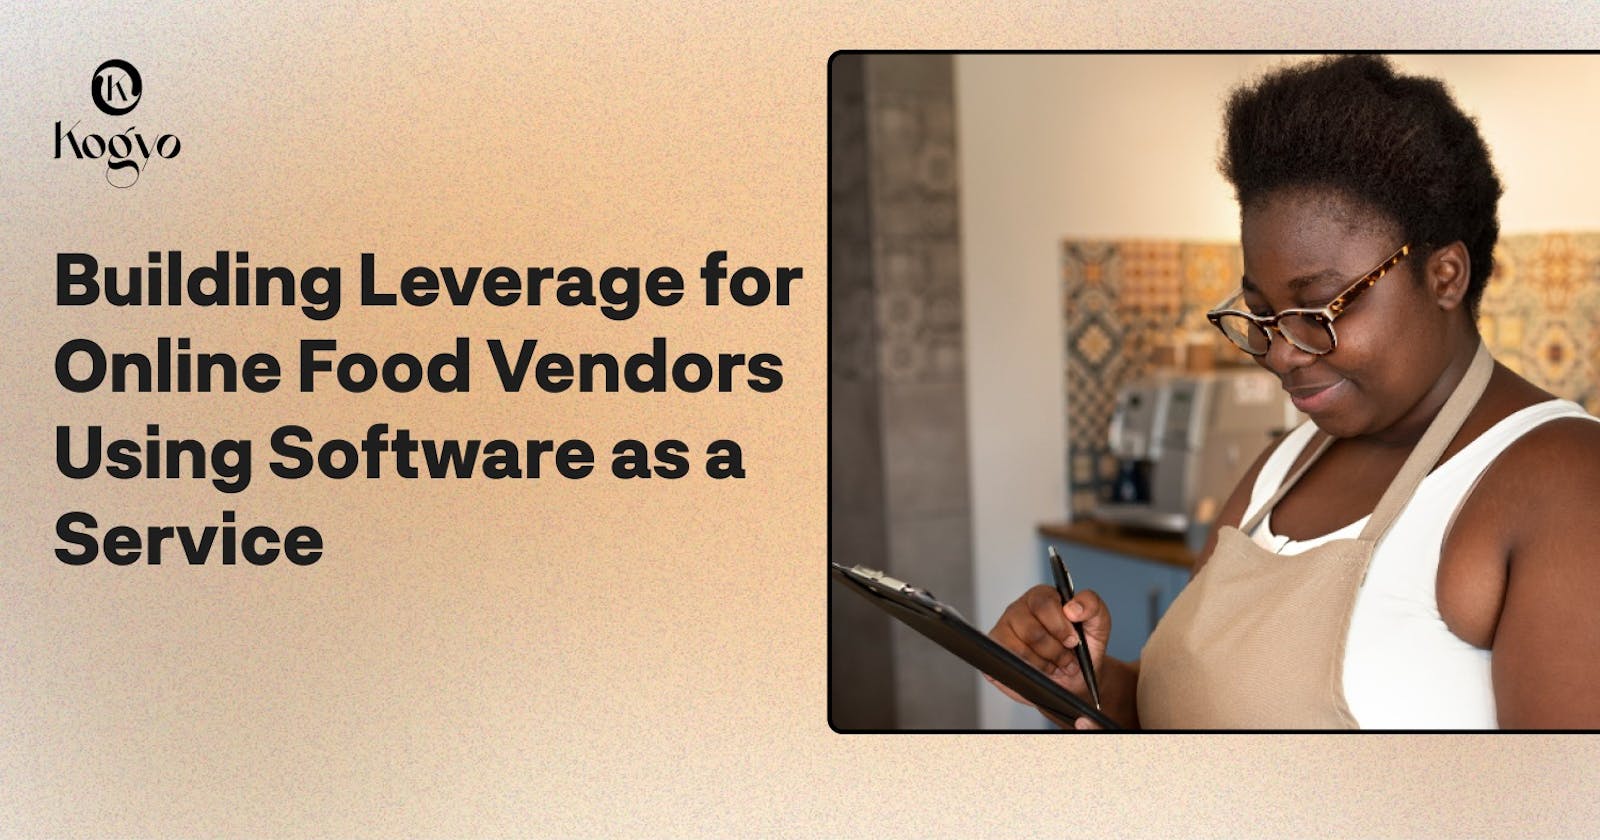 Building Leverage for Online Food Vendors Using Software as a Service